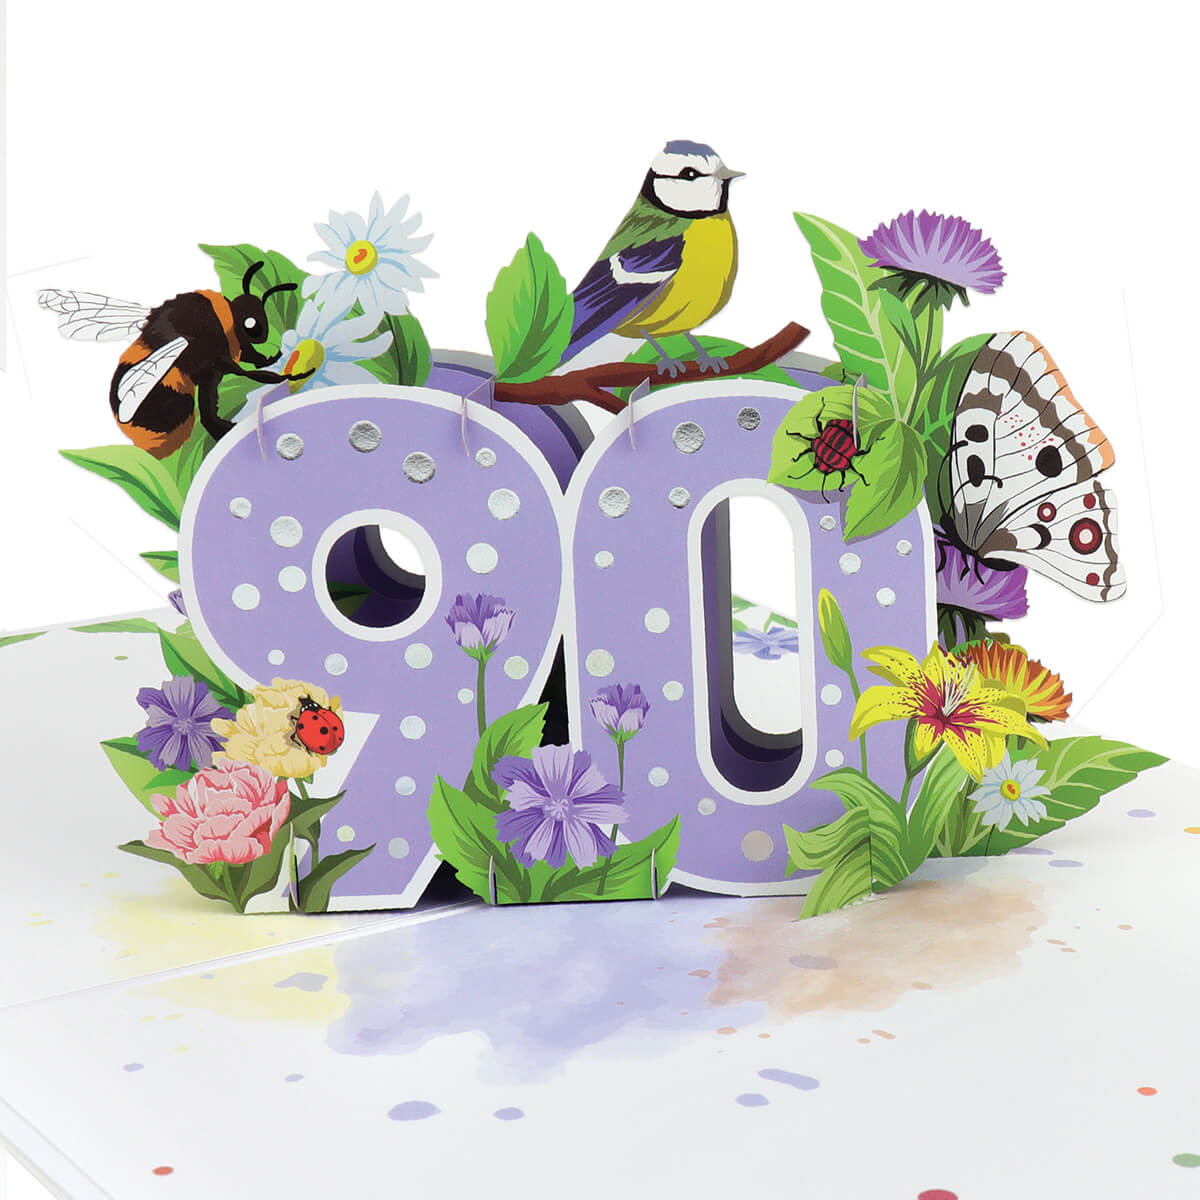 close up image of 90th birthday pop up card, soft lilac with foiled silver dots on the 3D pop up 90, surrounded by butterflies, birds and insects. Inspiration of the great british countryside